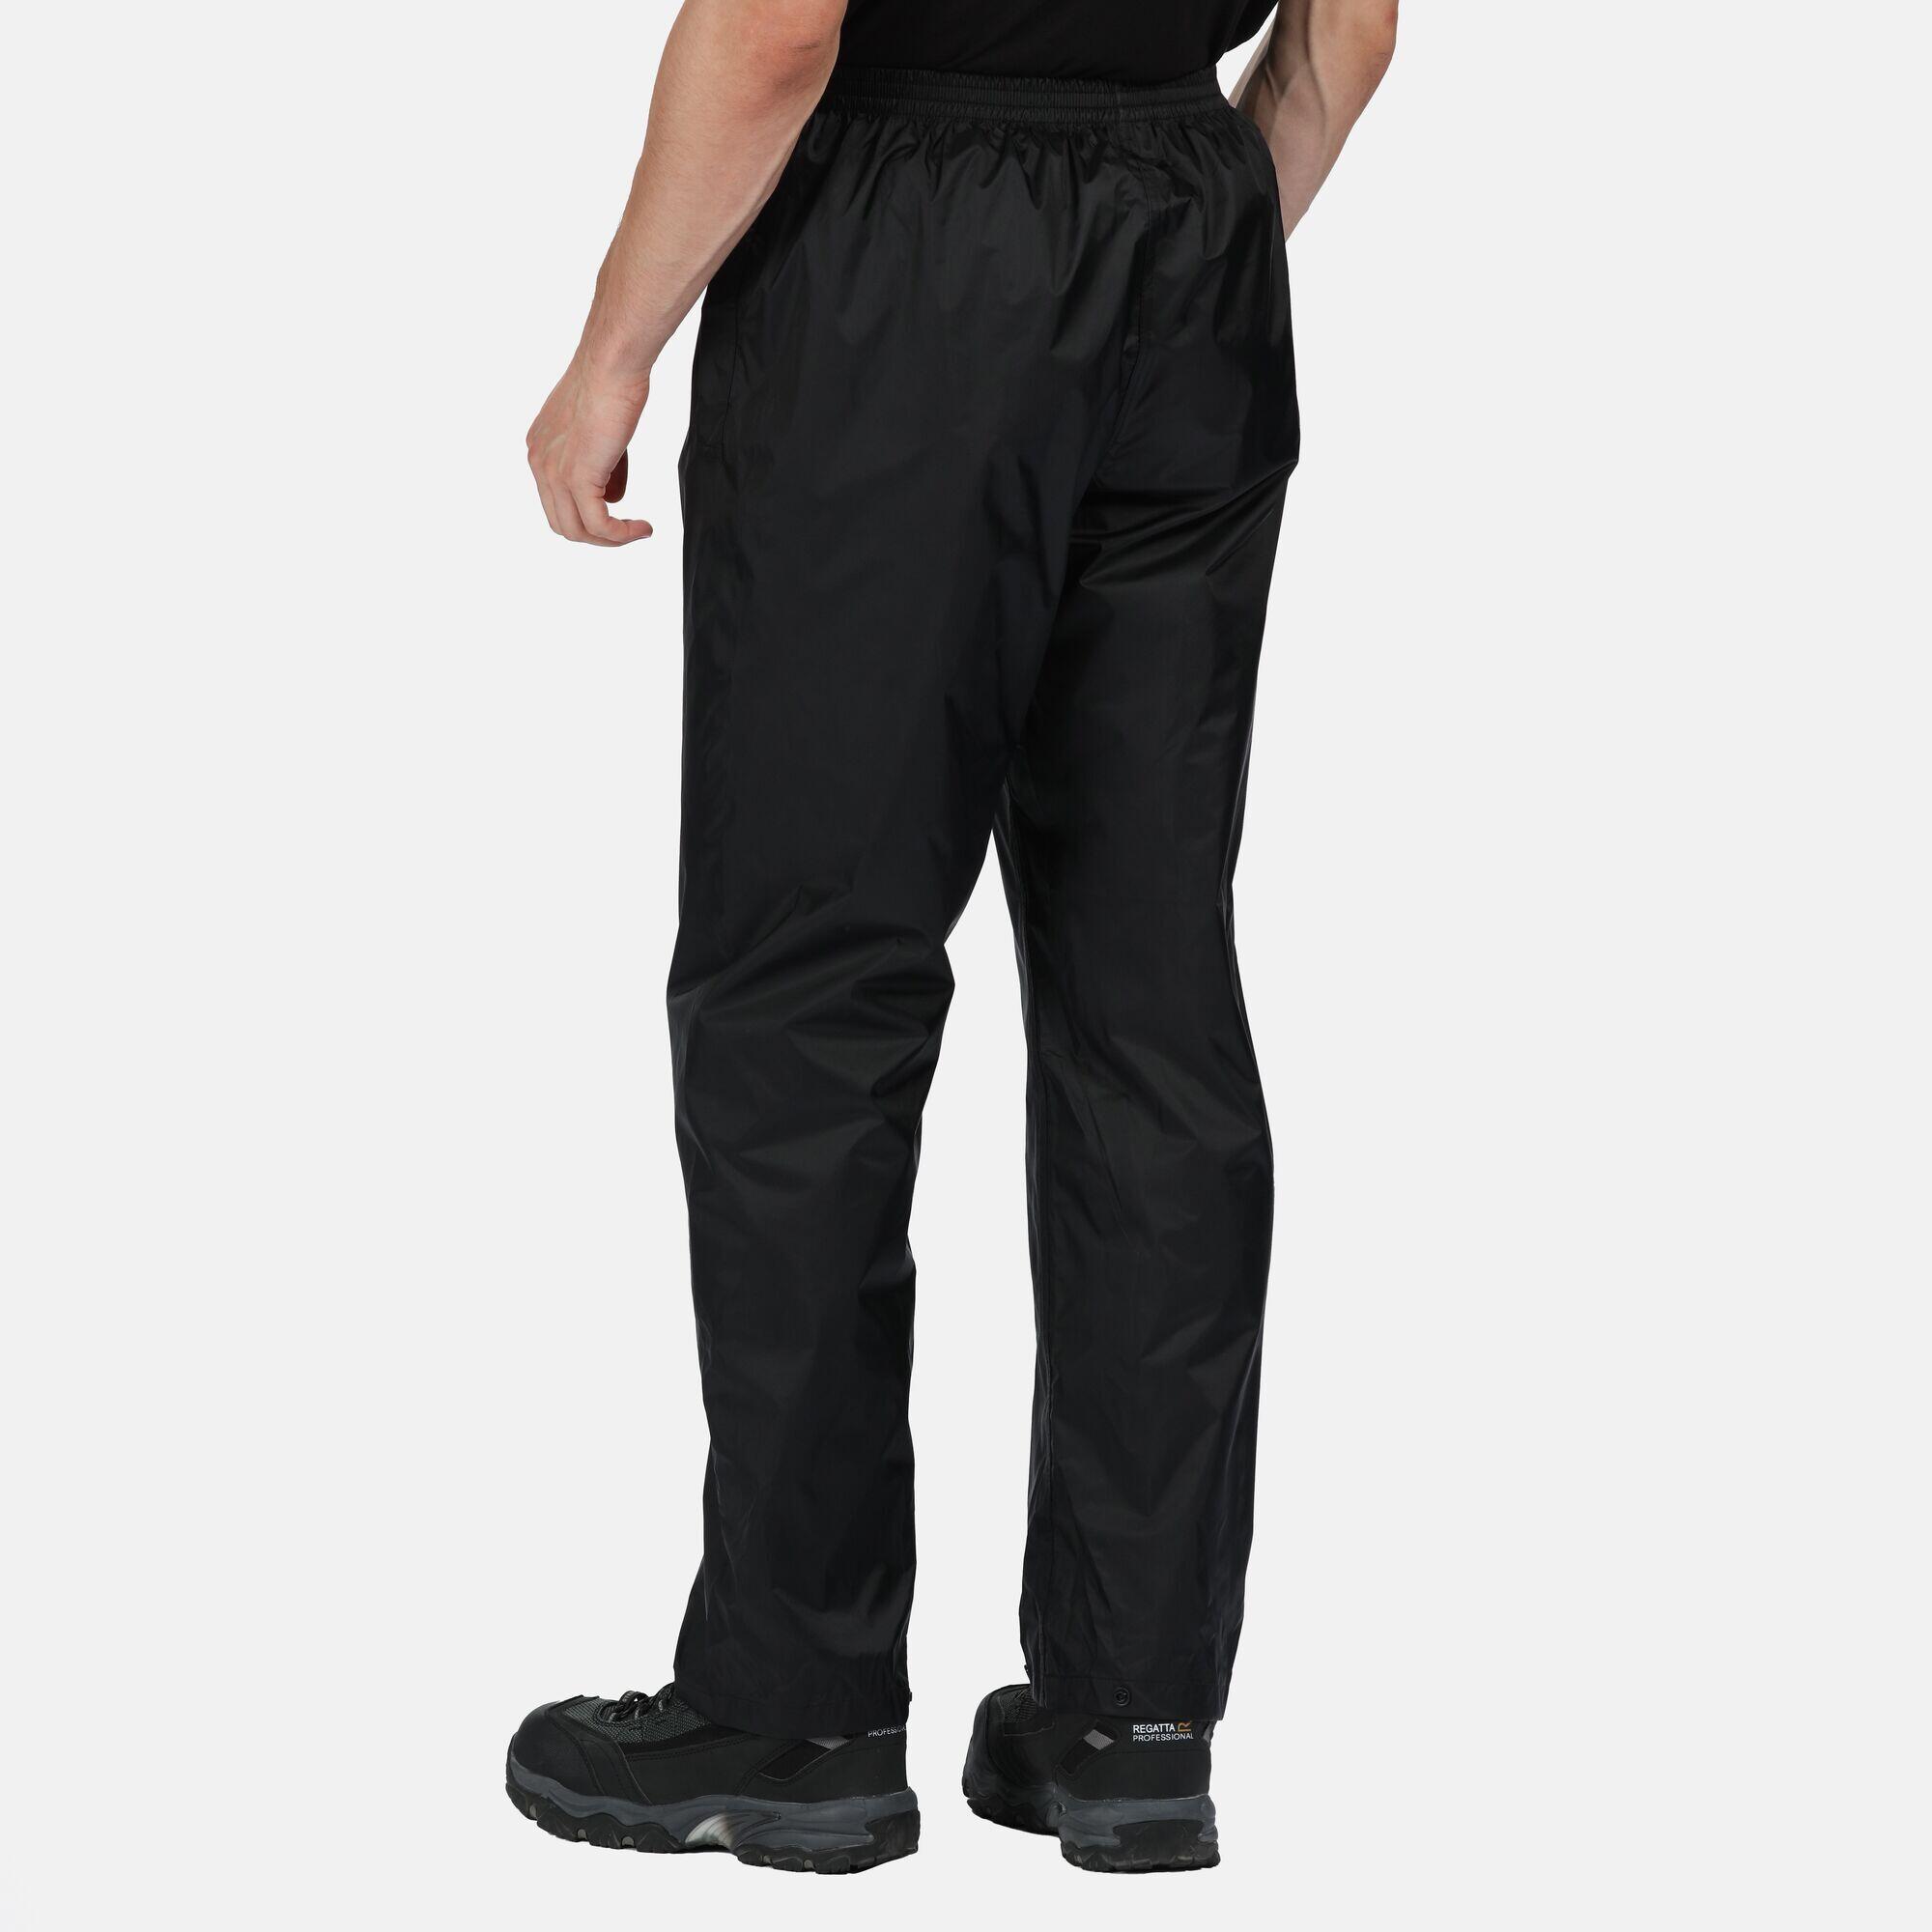 Mens Pro Packaway Overtrousers (Black) 3/4